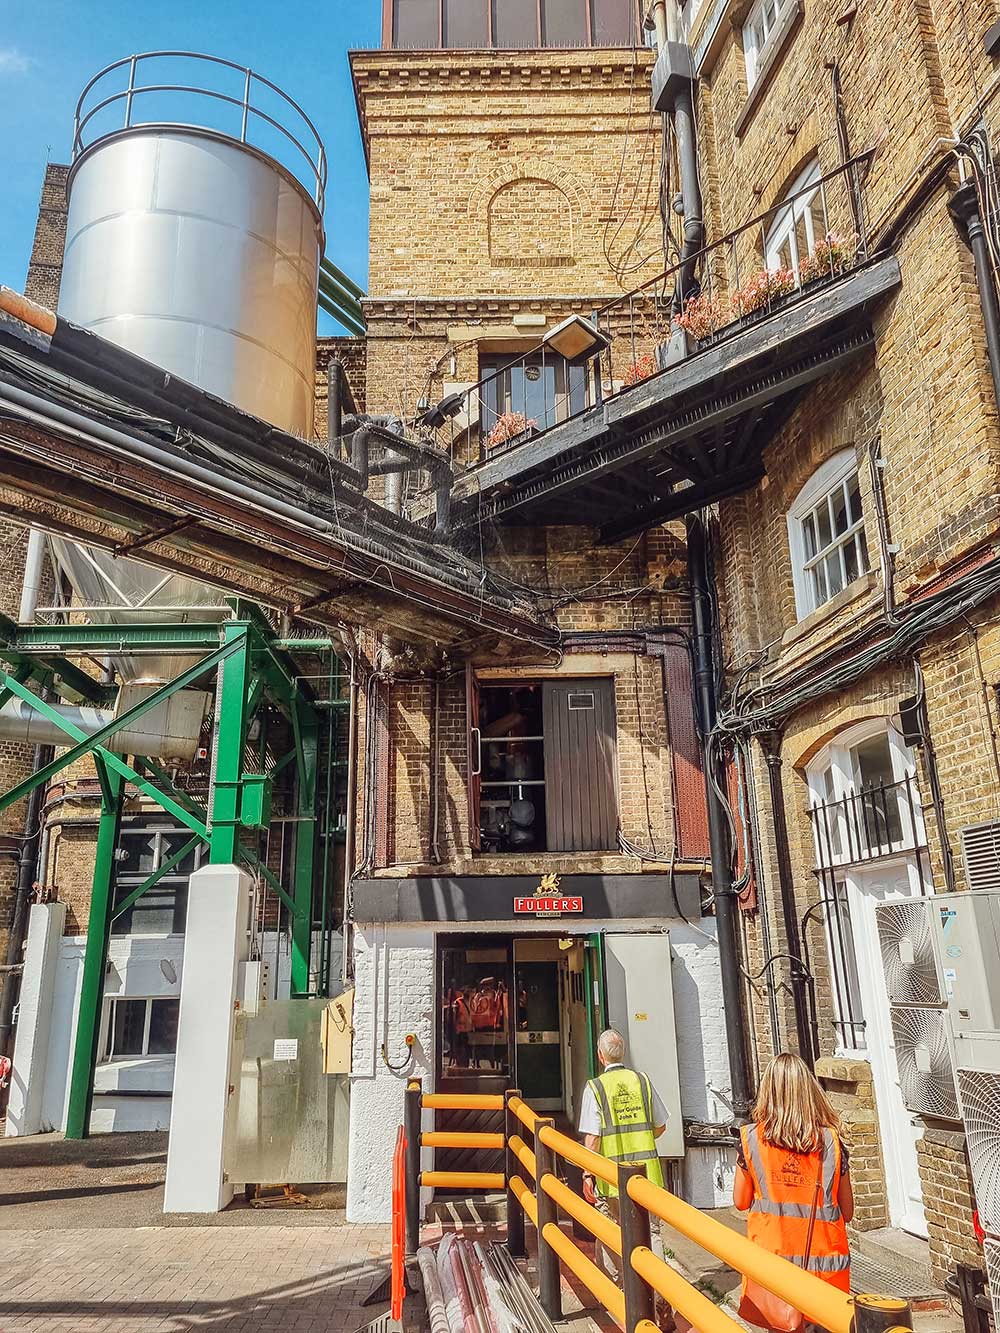 Fuller's Brewery tour in Chiswick London